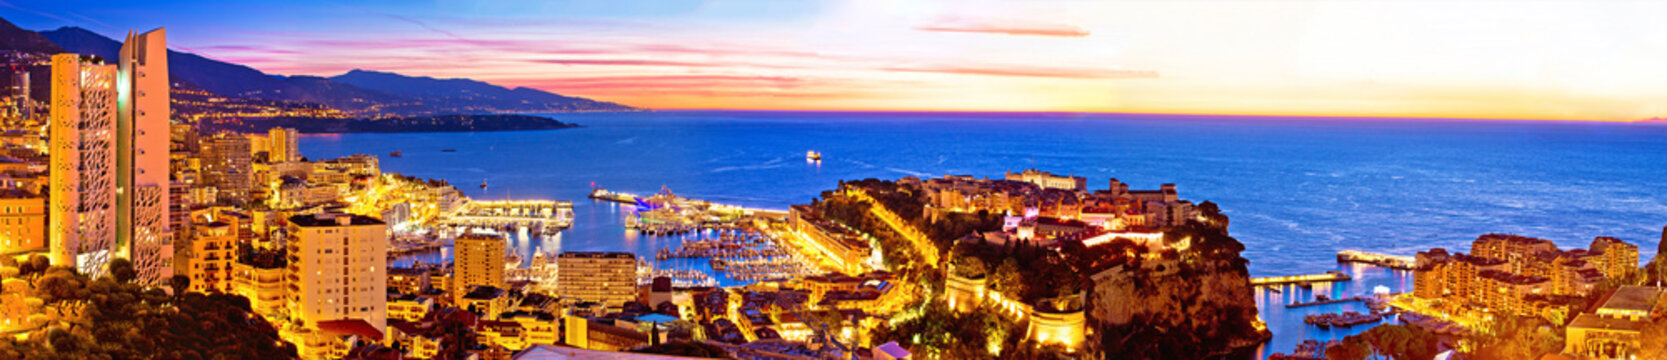 Monte Carlo cityscape colorful evening panoramic view from above